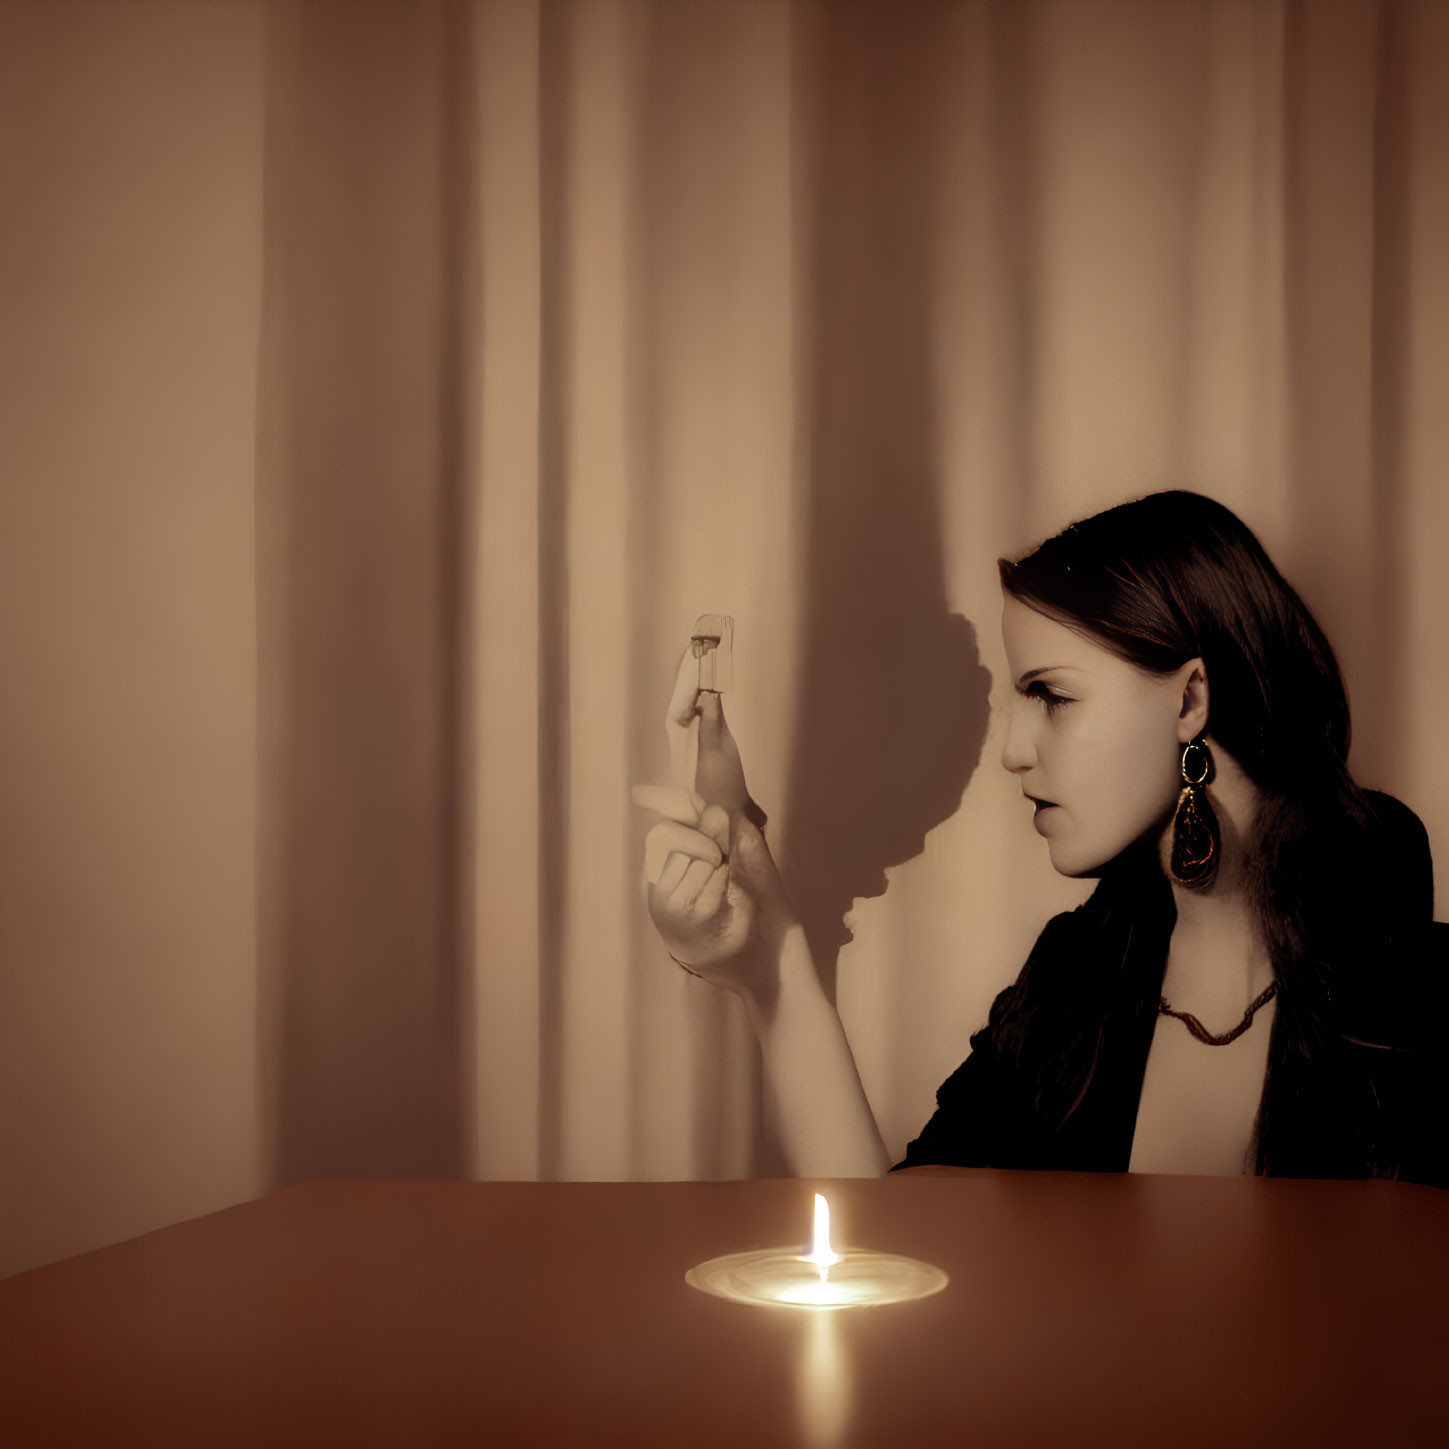 Woman sitting at table with lit candle and extinguished matchstick, casting shadow on draped background.